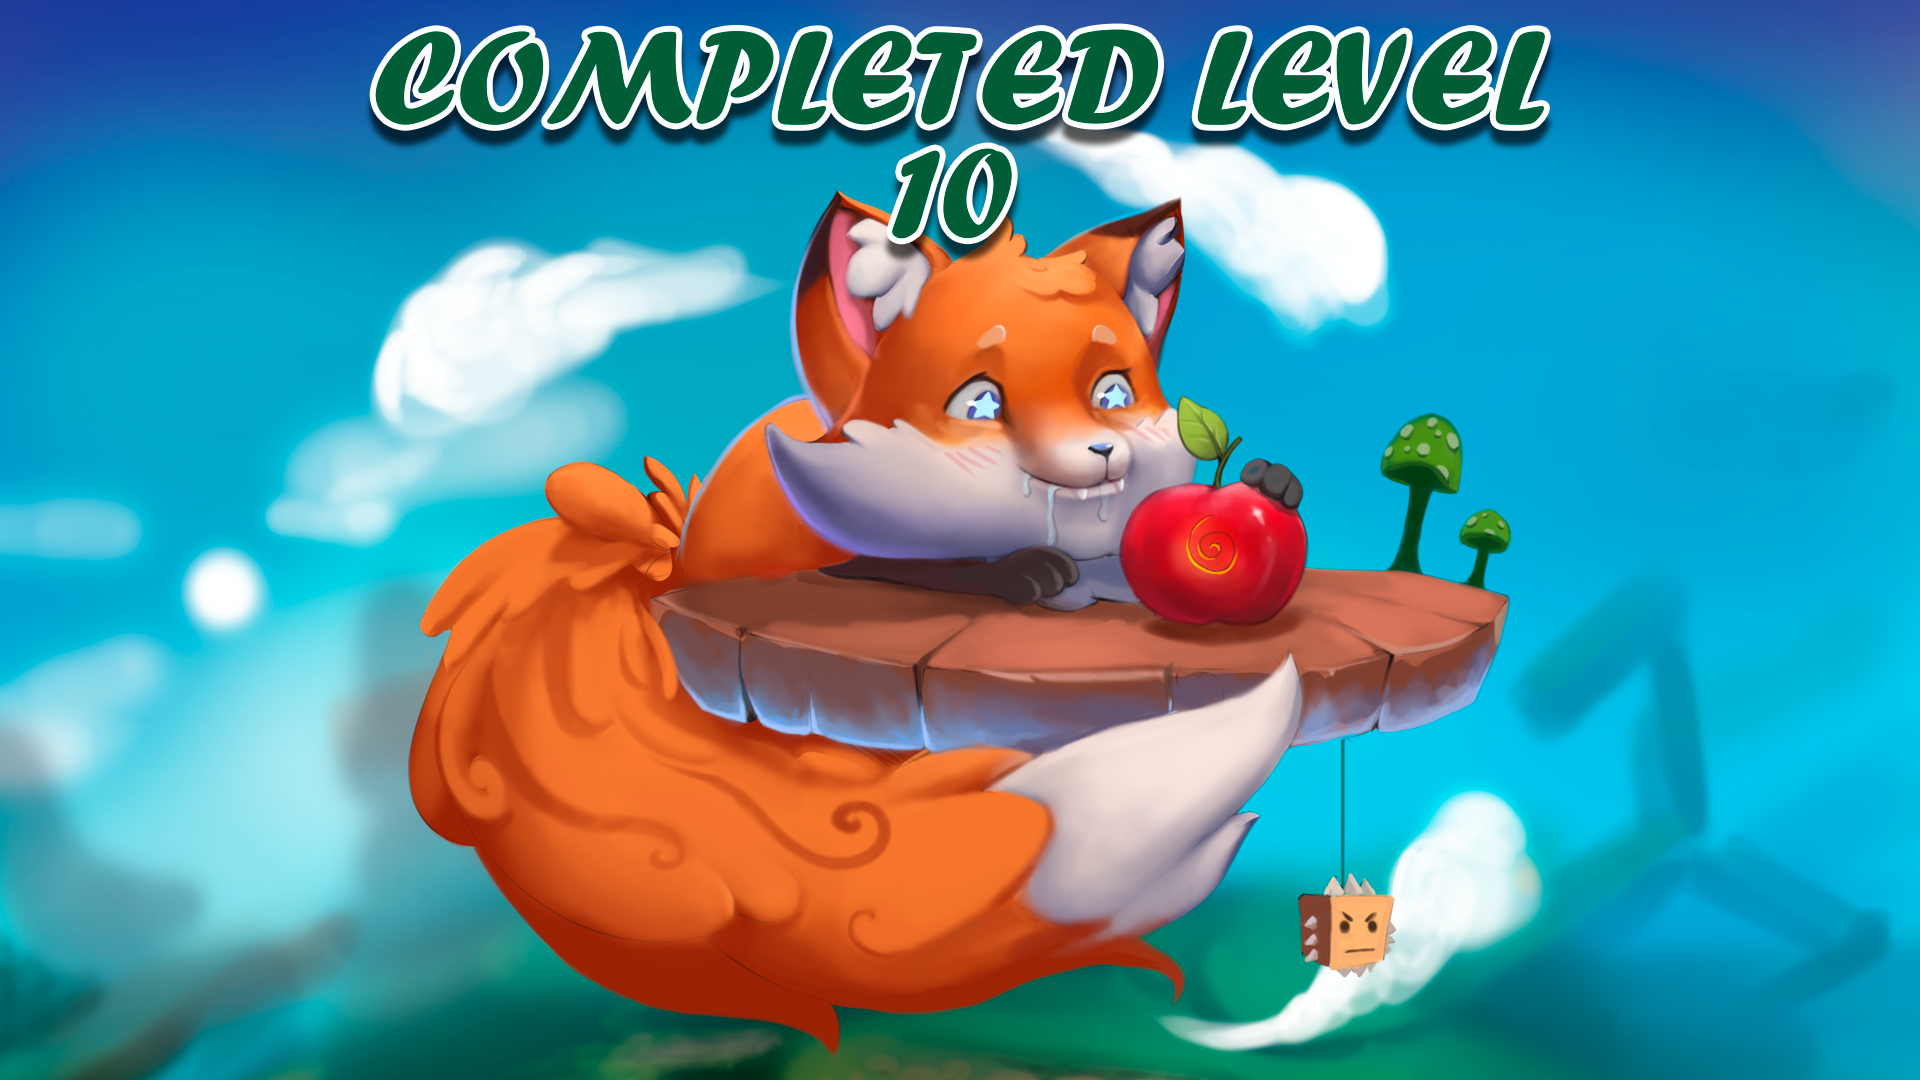 Icon for 10 levels completed